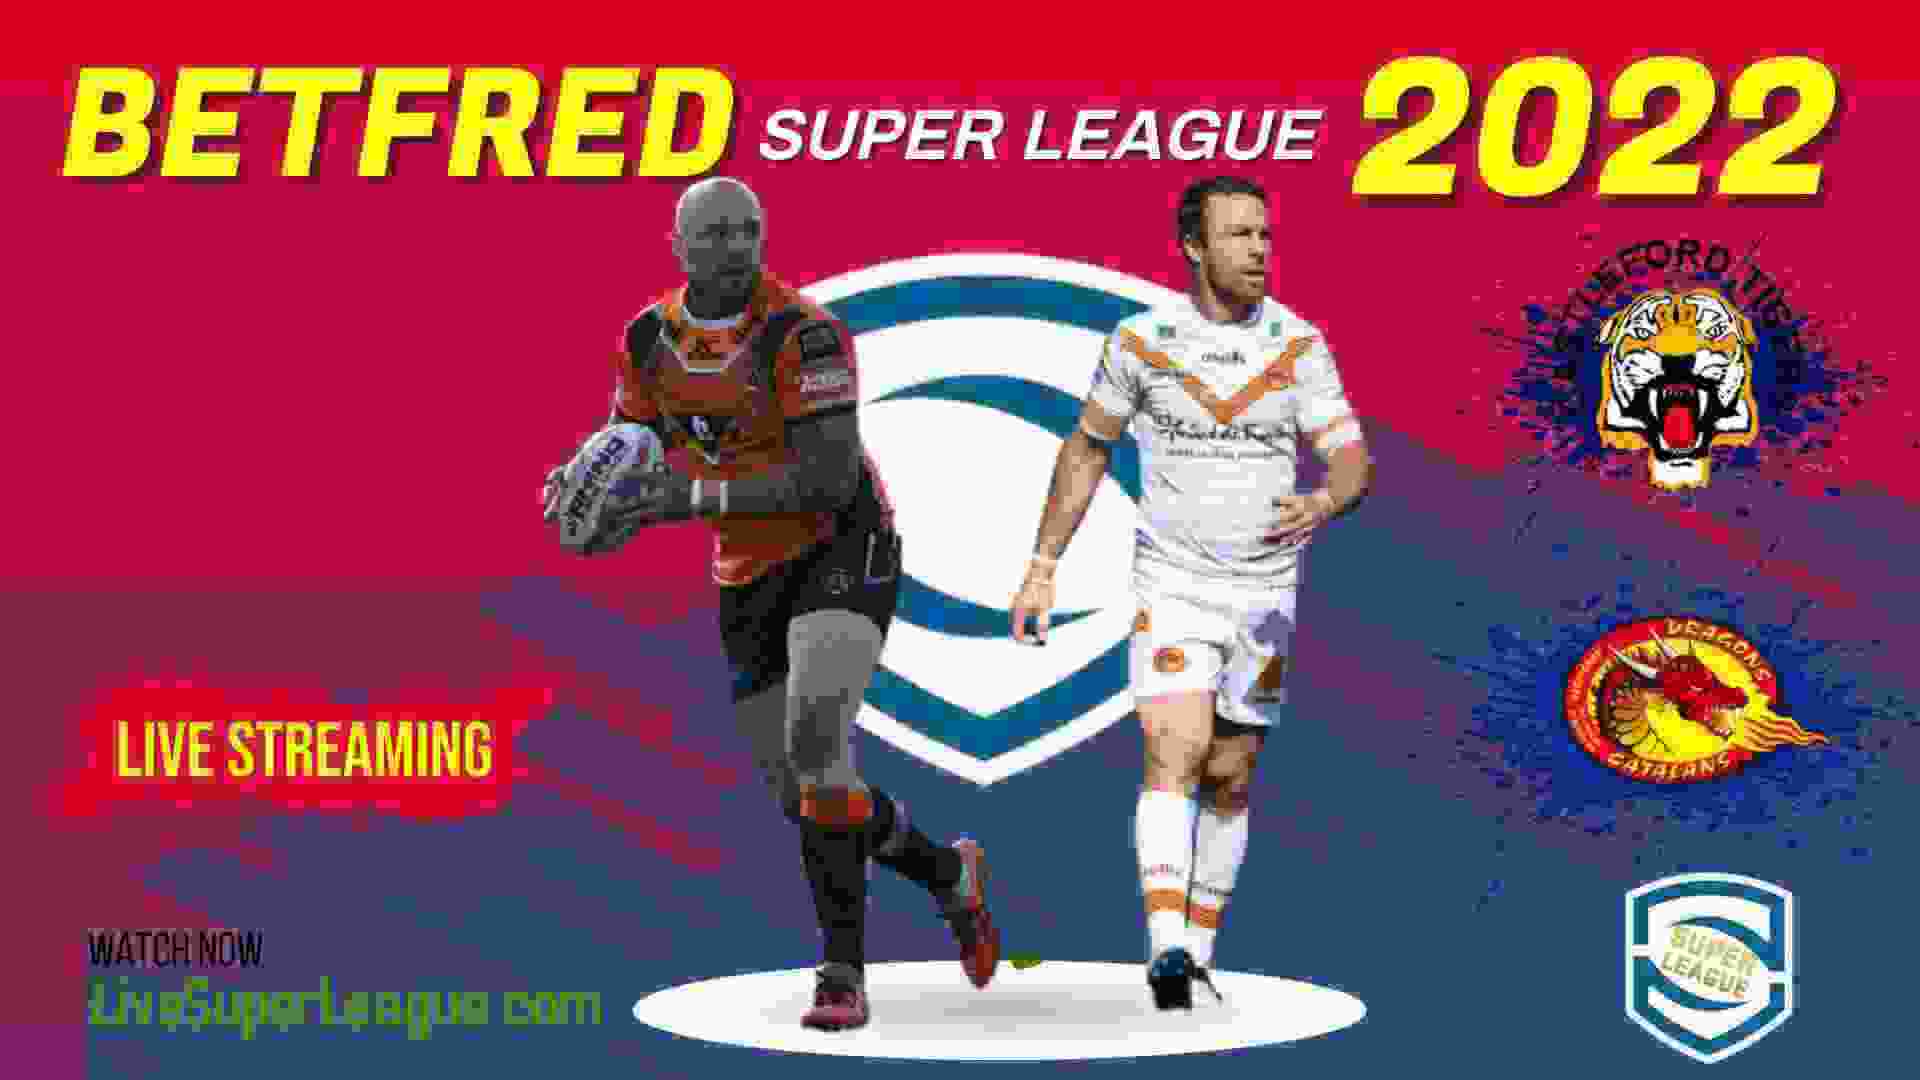 live-castleford-tigers-vs-catalans-dragons-streaming